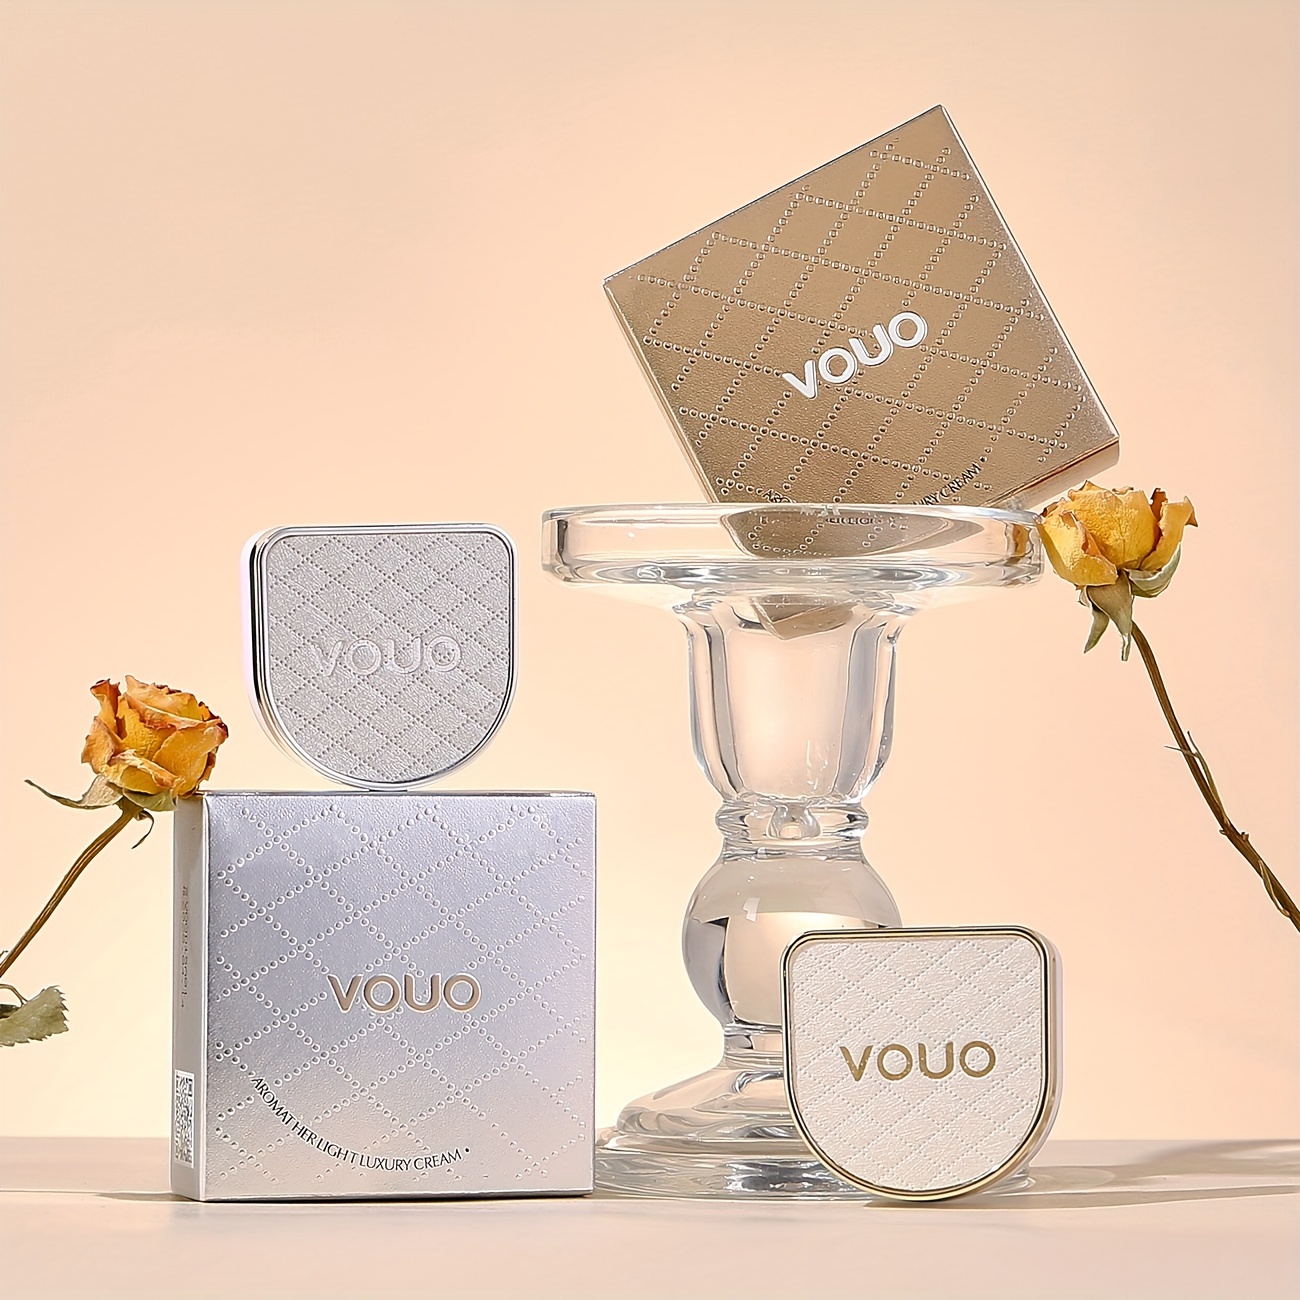 

Vouo Luxury Solid Perfume For Women - Long-lasting, Alcohol-free, Portable & Natural Scent With Oriental Notes